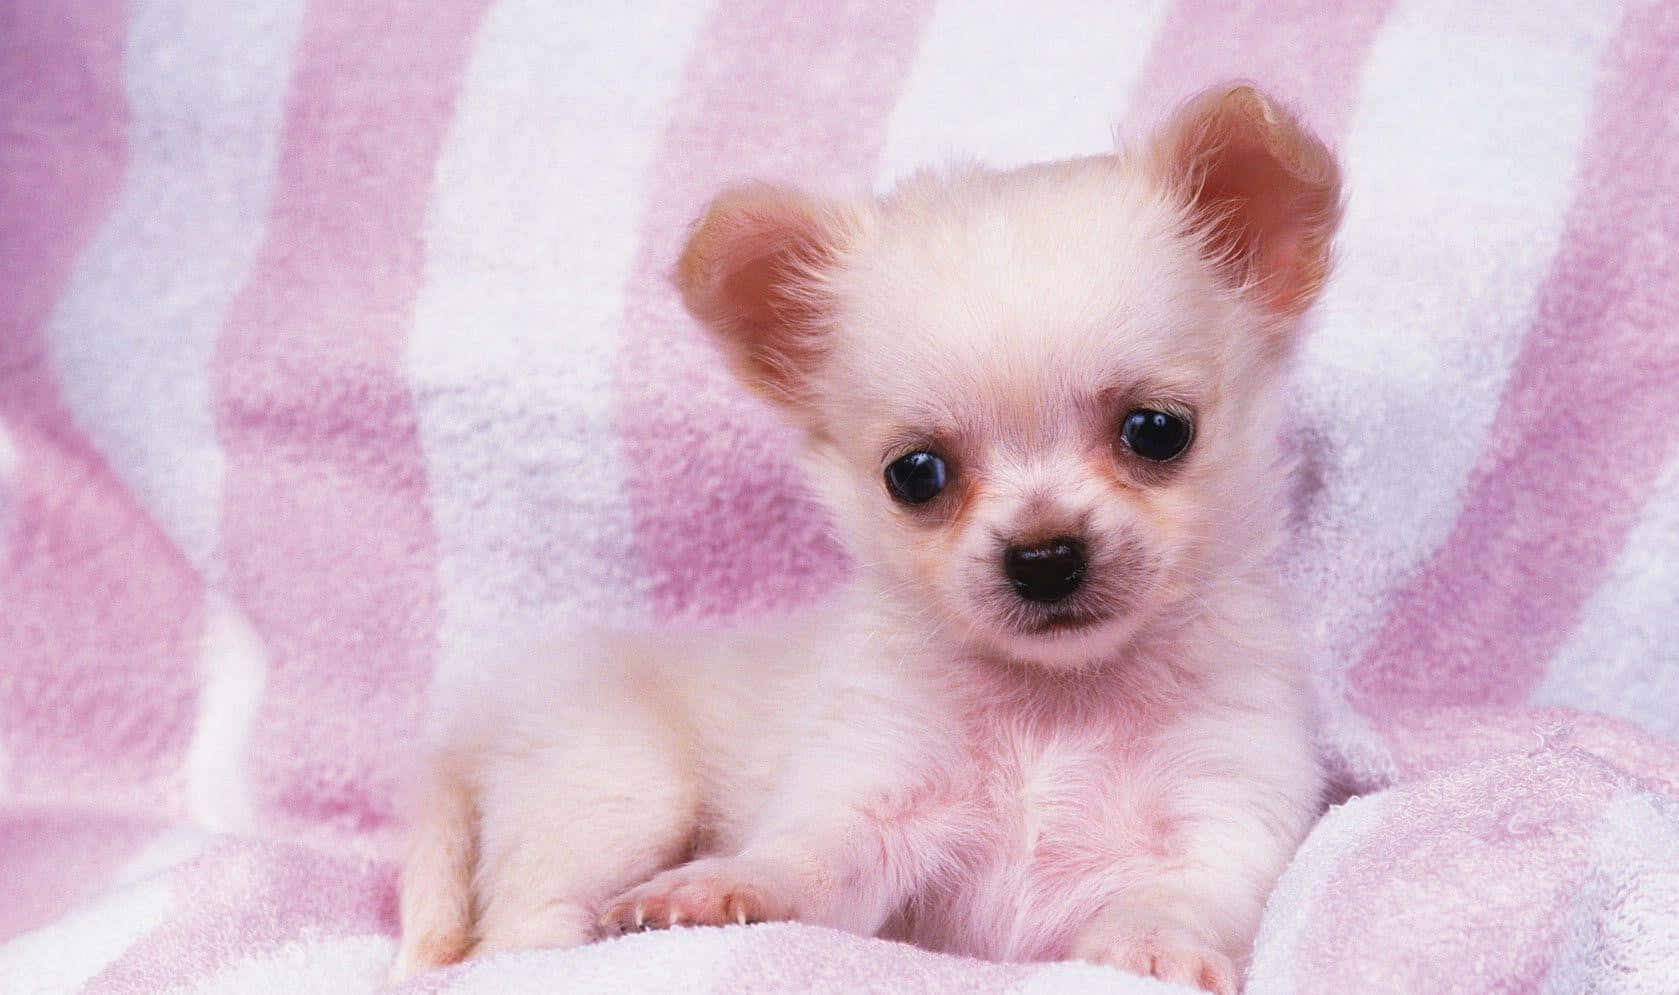 A Small White Puppy Sitting On A Pink And White Blanket Wallpaper